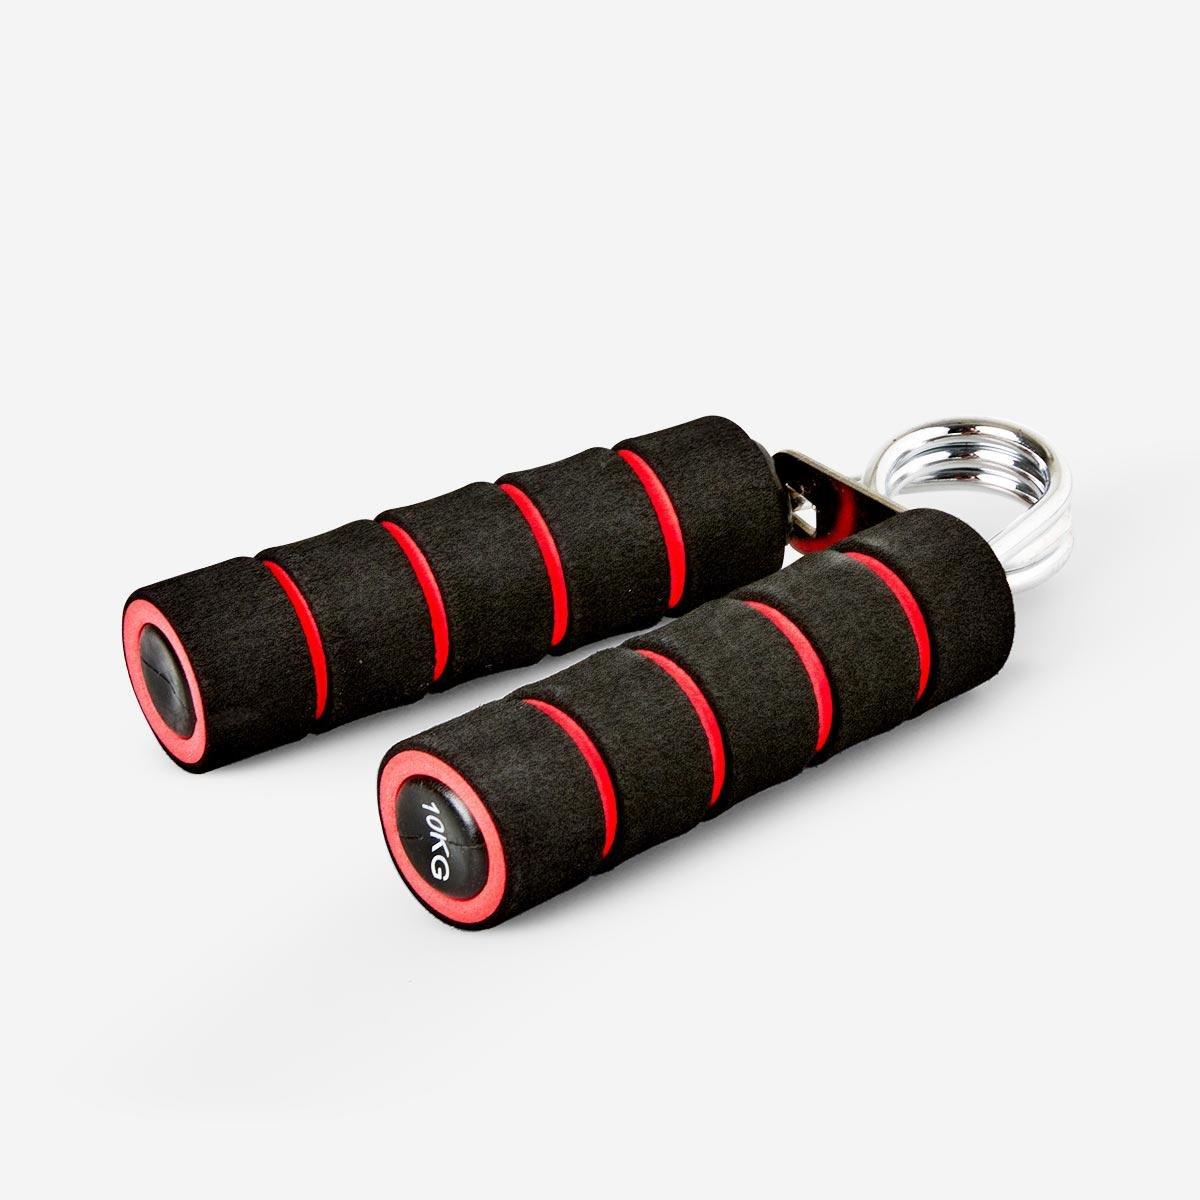 Black and red hand grip. 10 kg